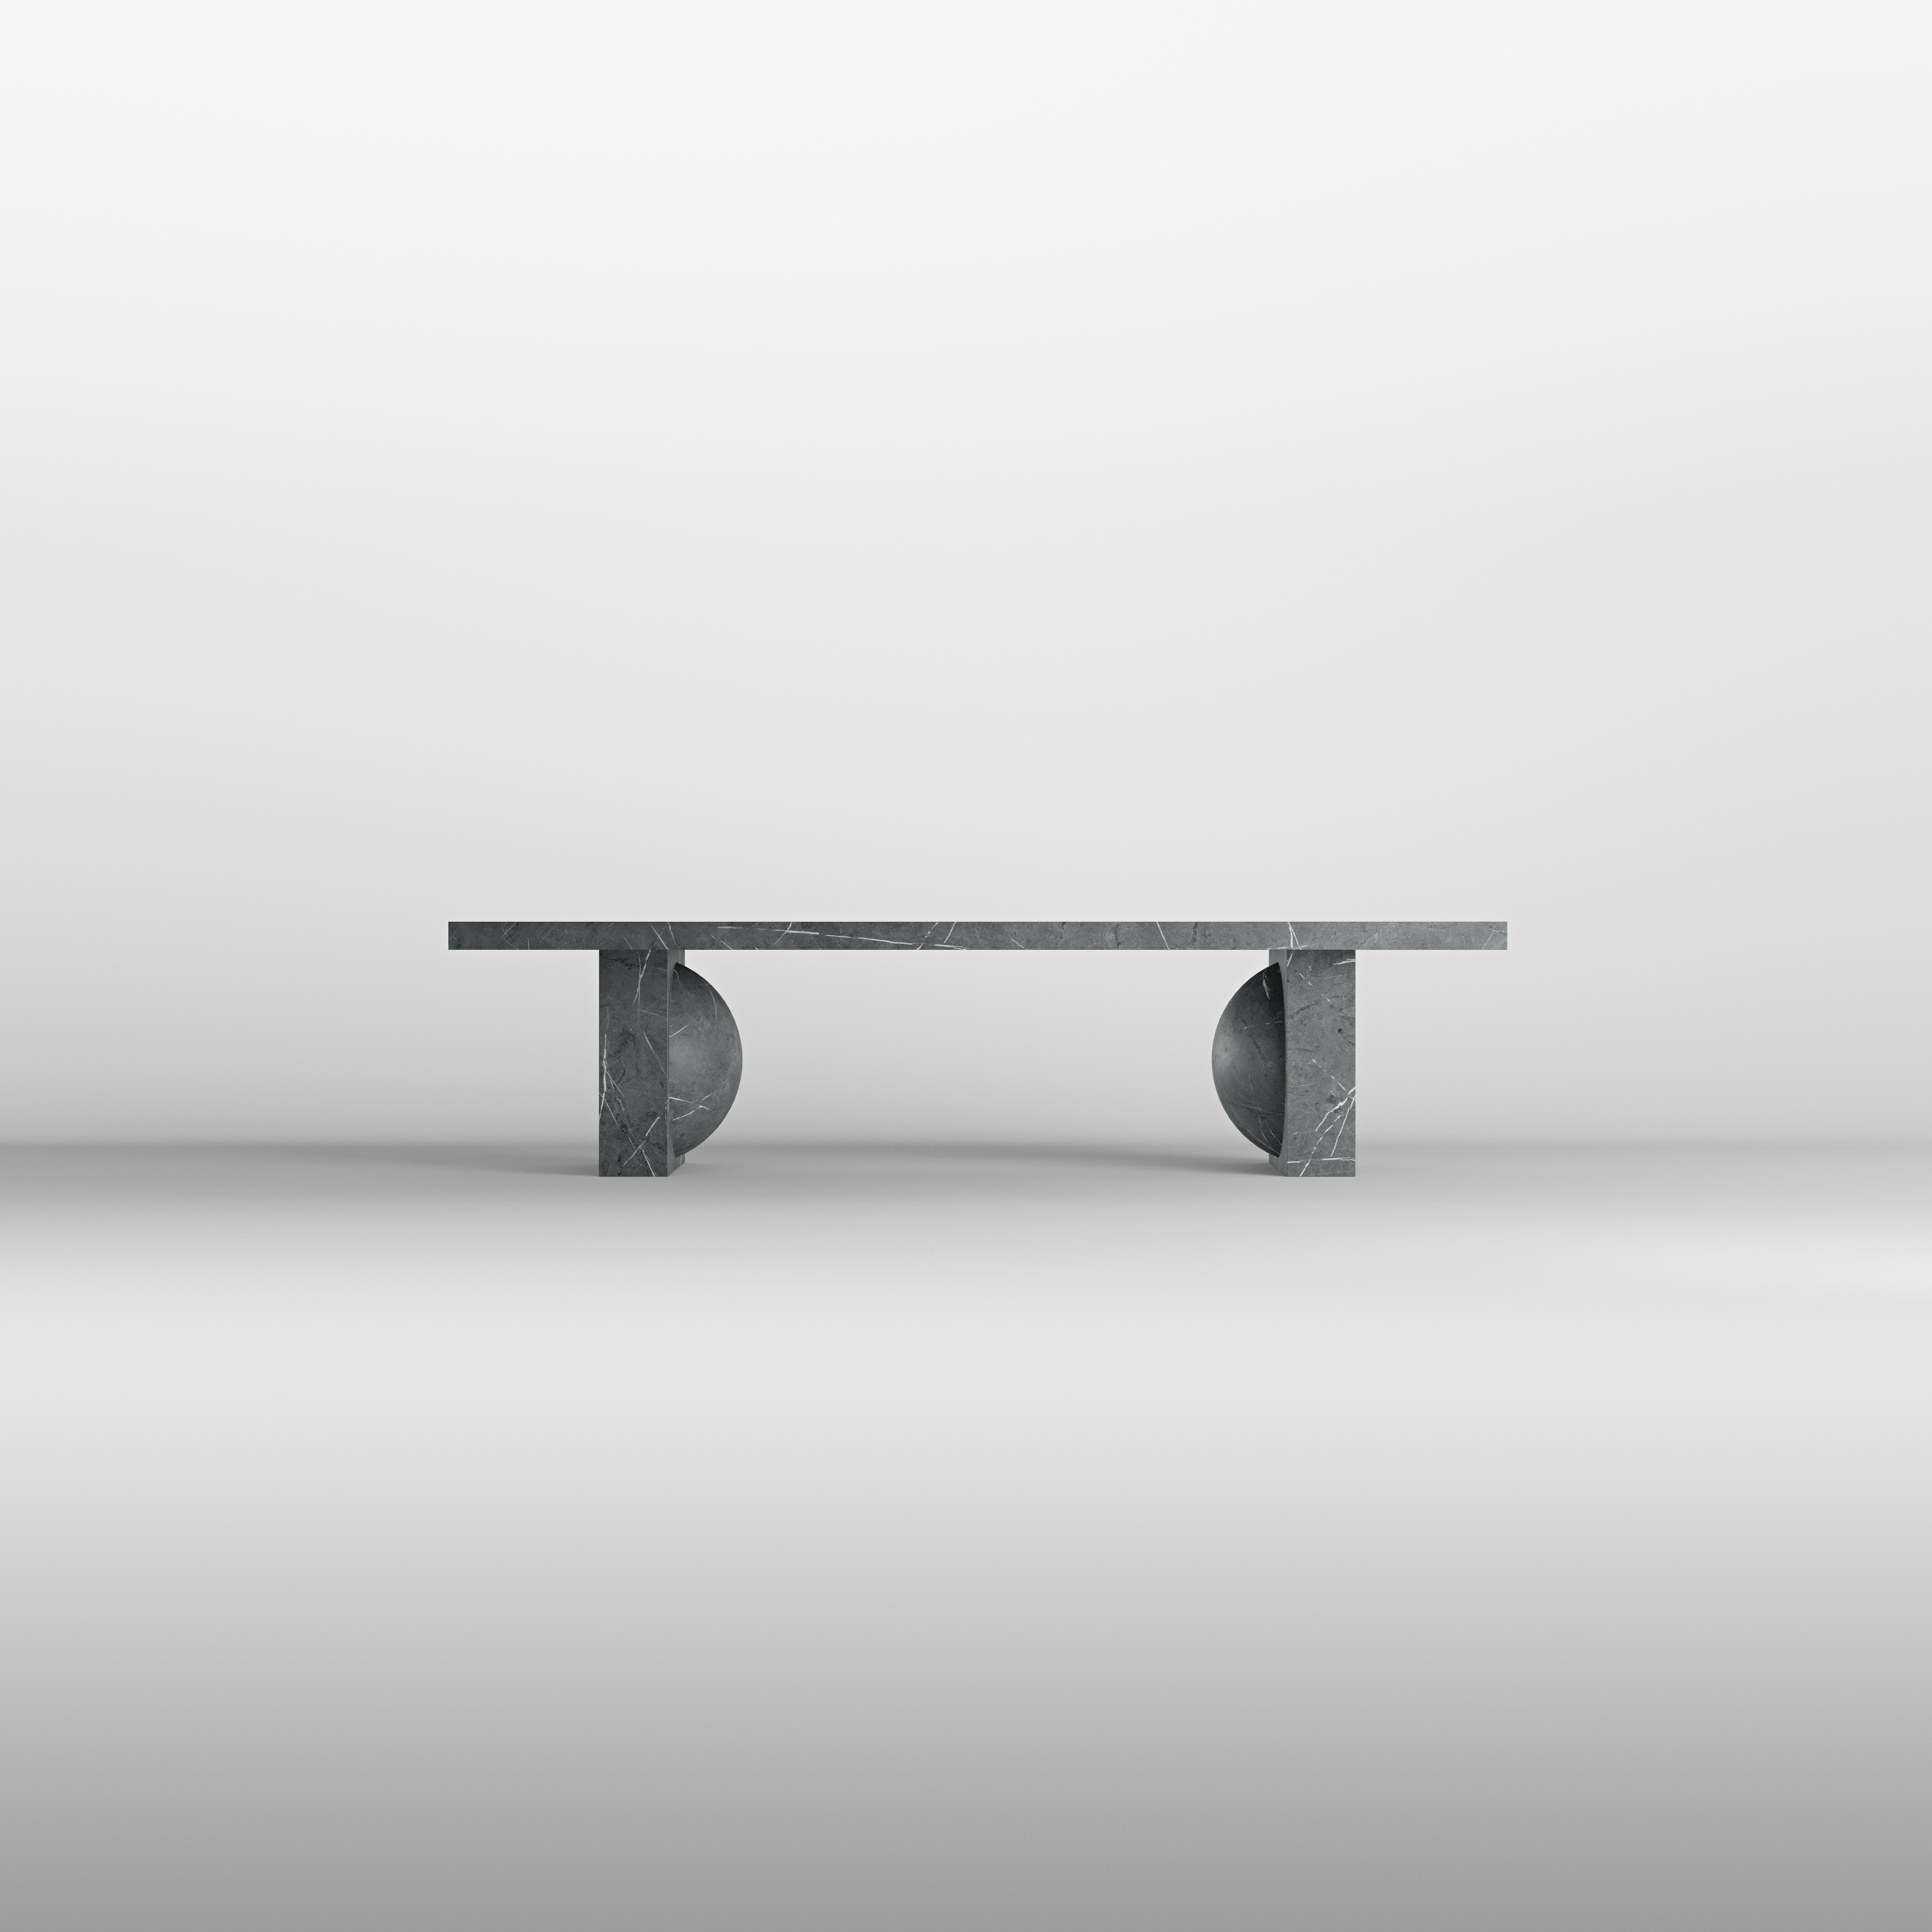 Made-to-order
H2 Pietra Grey
Dining table by Johan Wilén

The Swedish designer's latest creation — Intertwining organic forms with exquisite natural stone material. This dining table is simple, yet disruptive. Meticulously finished by skilled